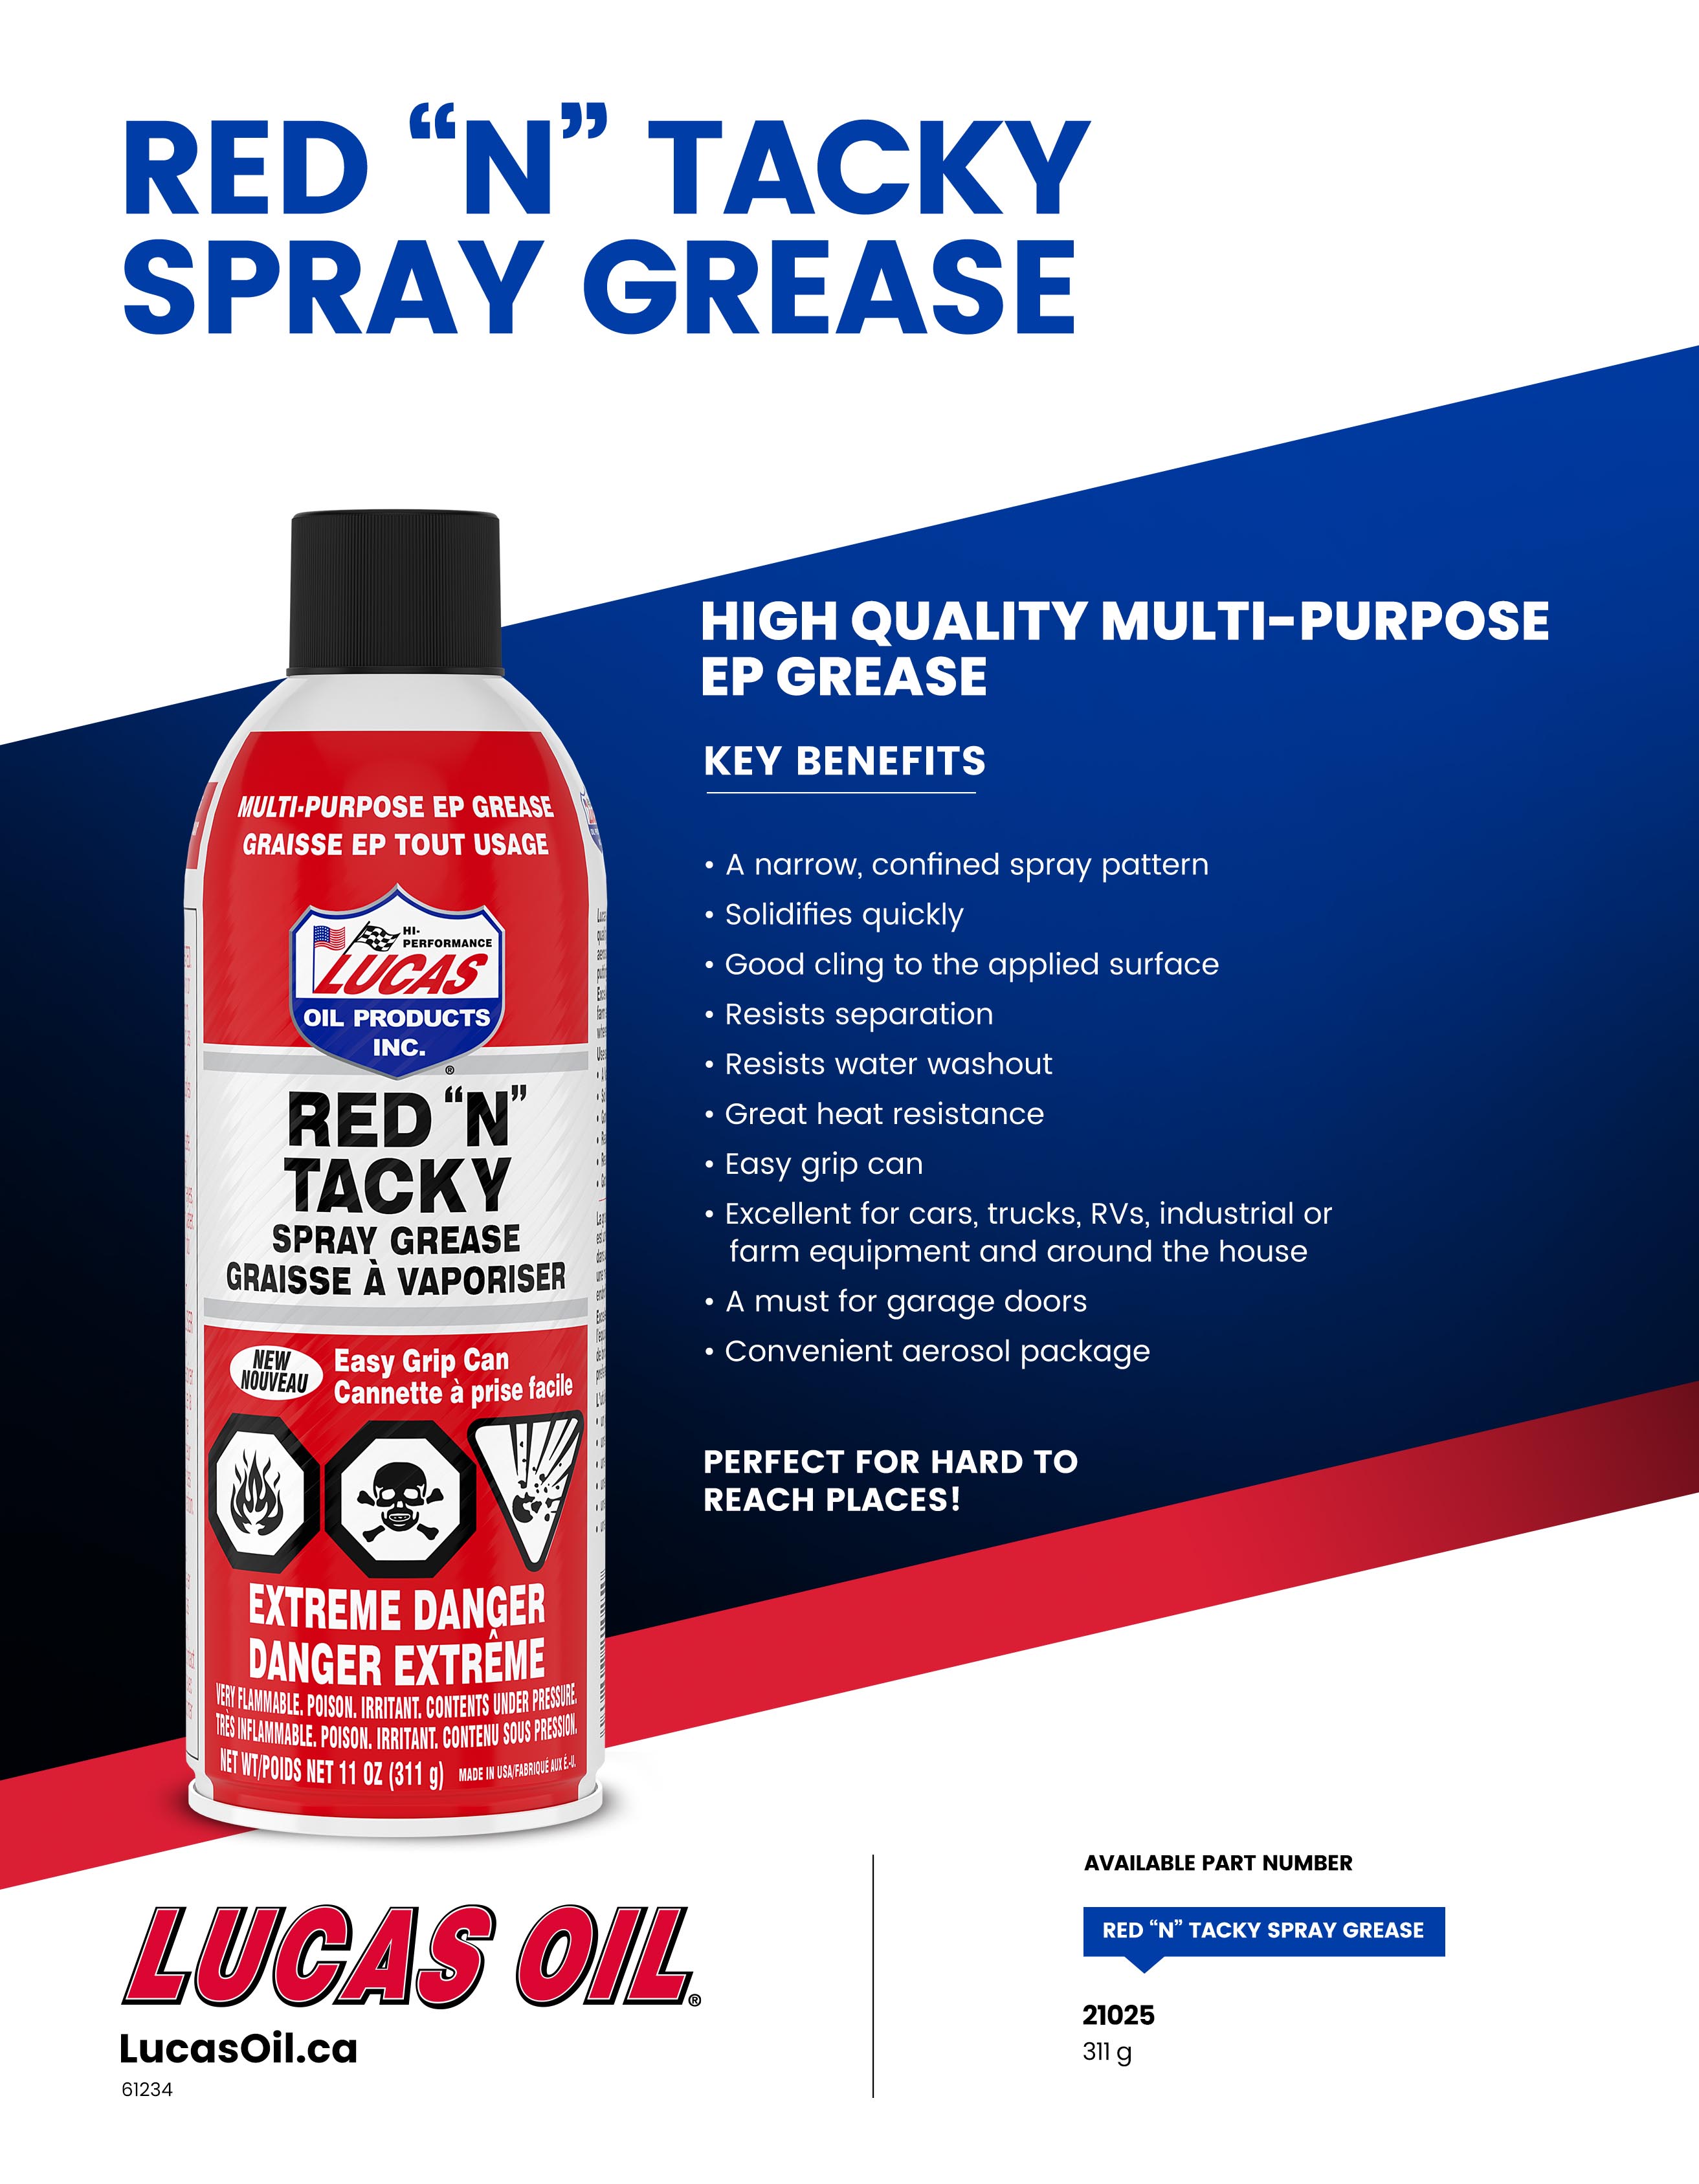 Lucas Oil - Lucas Oil Red N Tacky Spray Grease is now